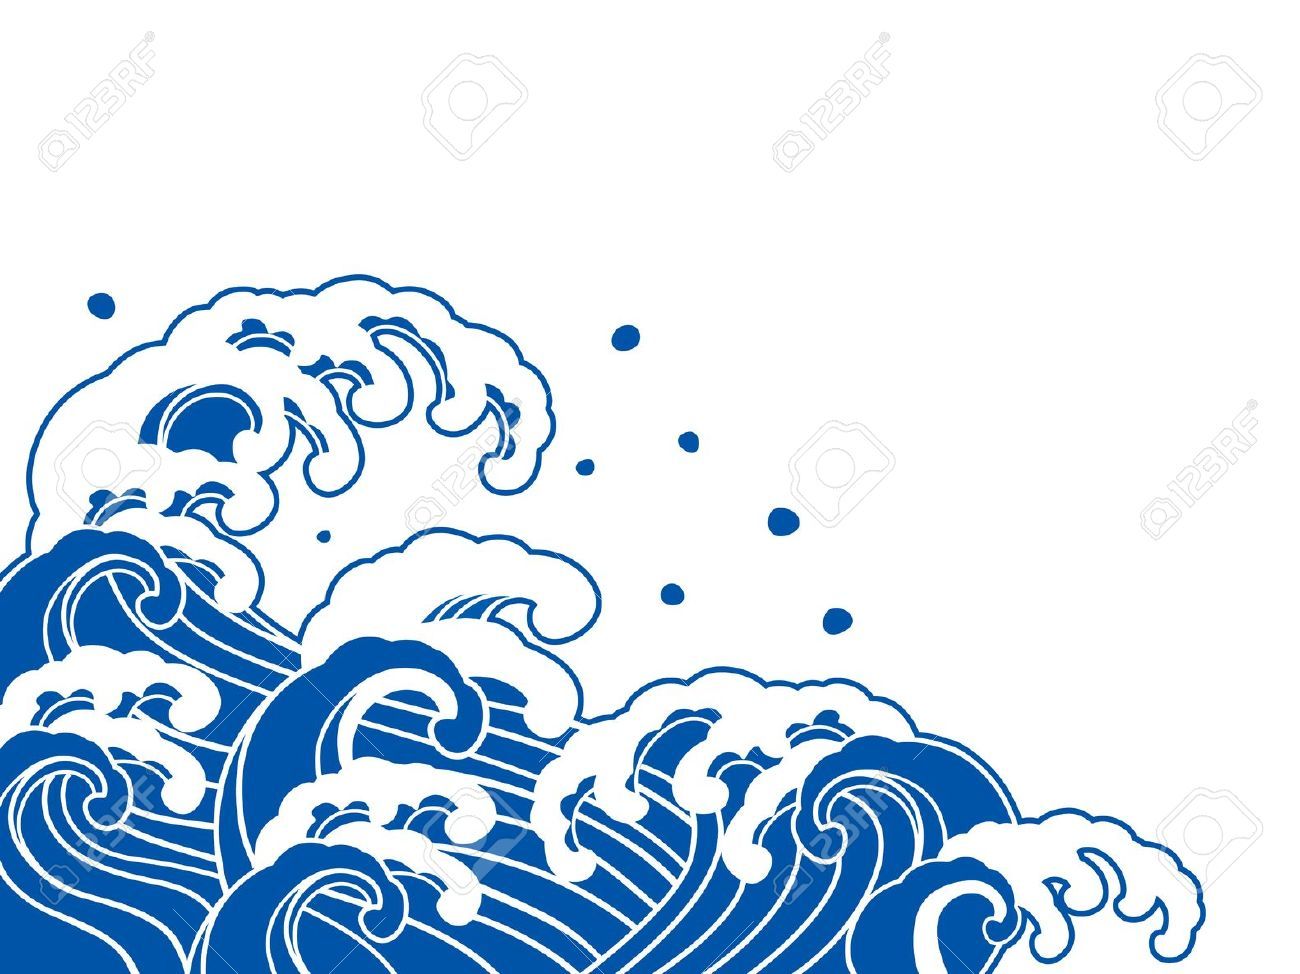 Stock vector making this. Waves clipart wave japanese